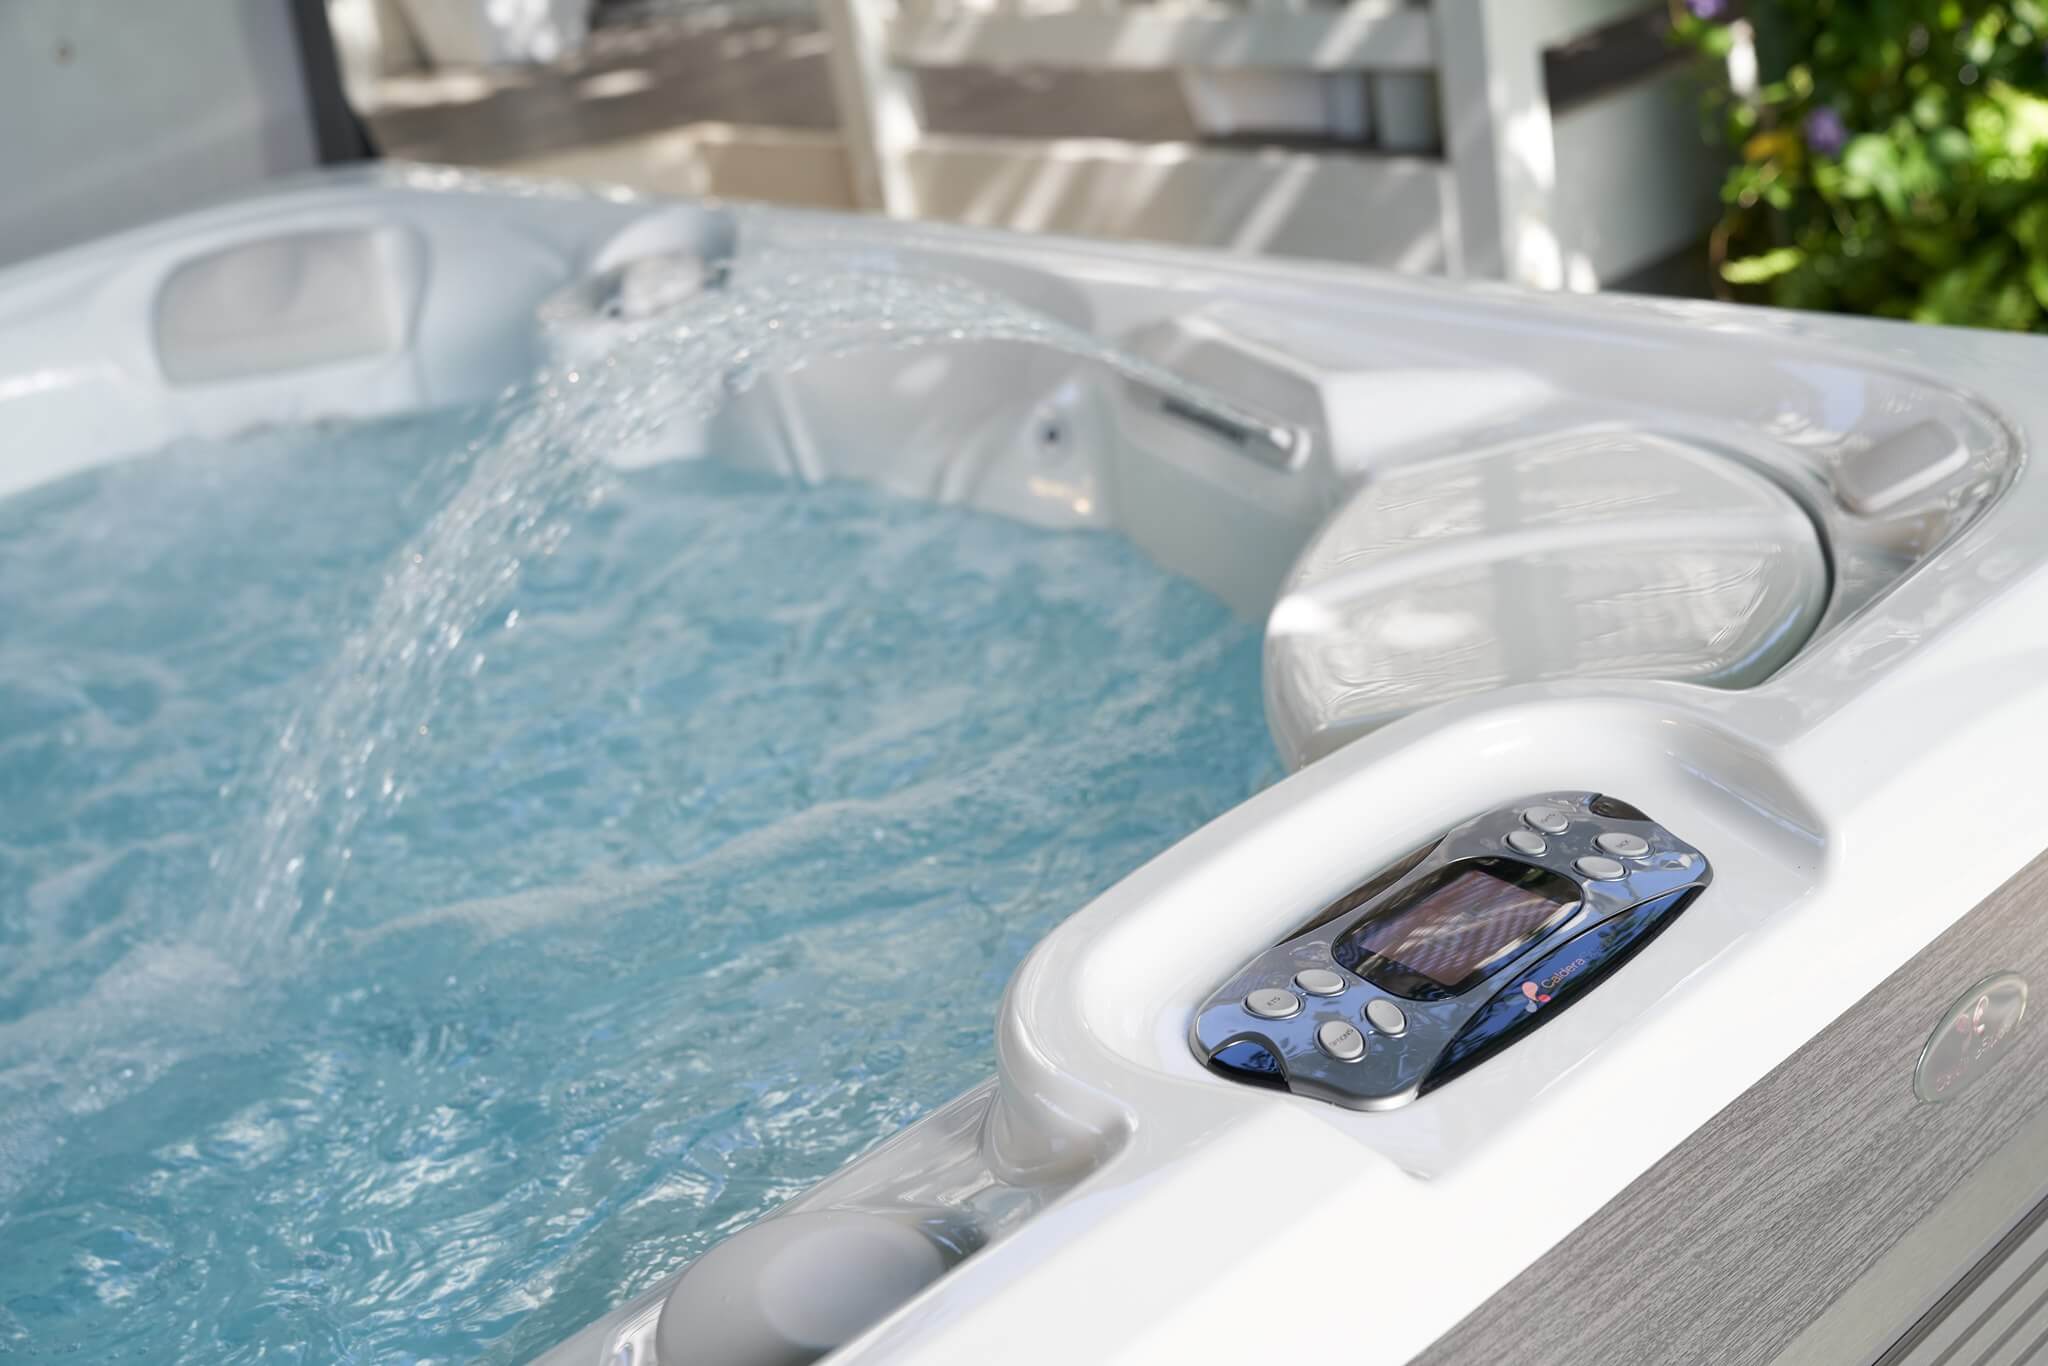 The Benefits of Soaking in a Hot Tub in Colder Weather